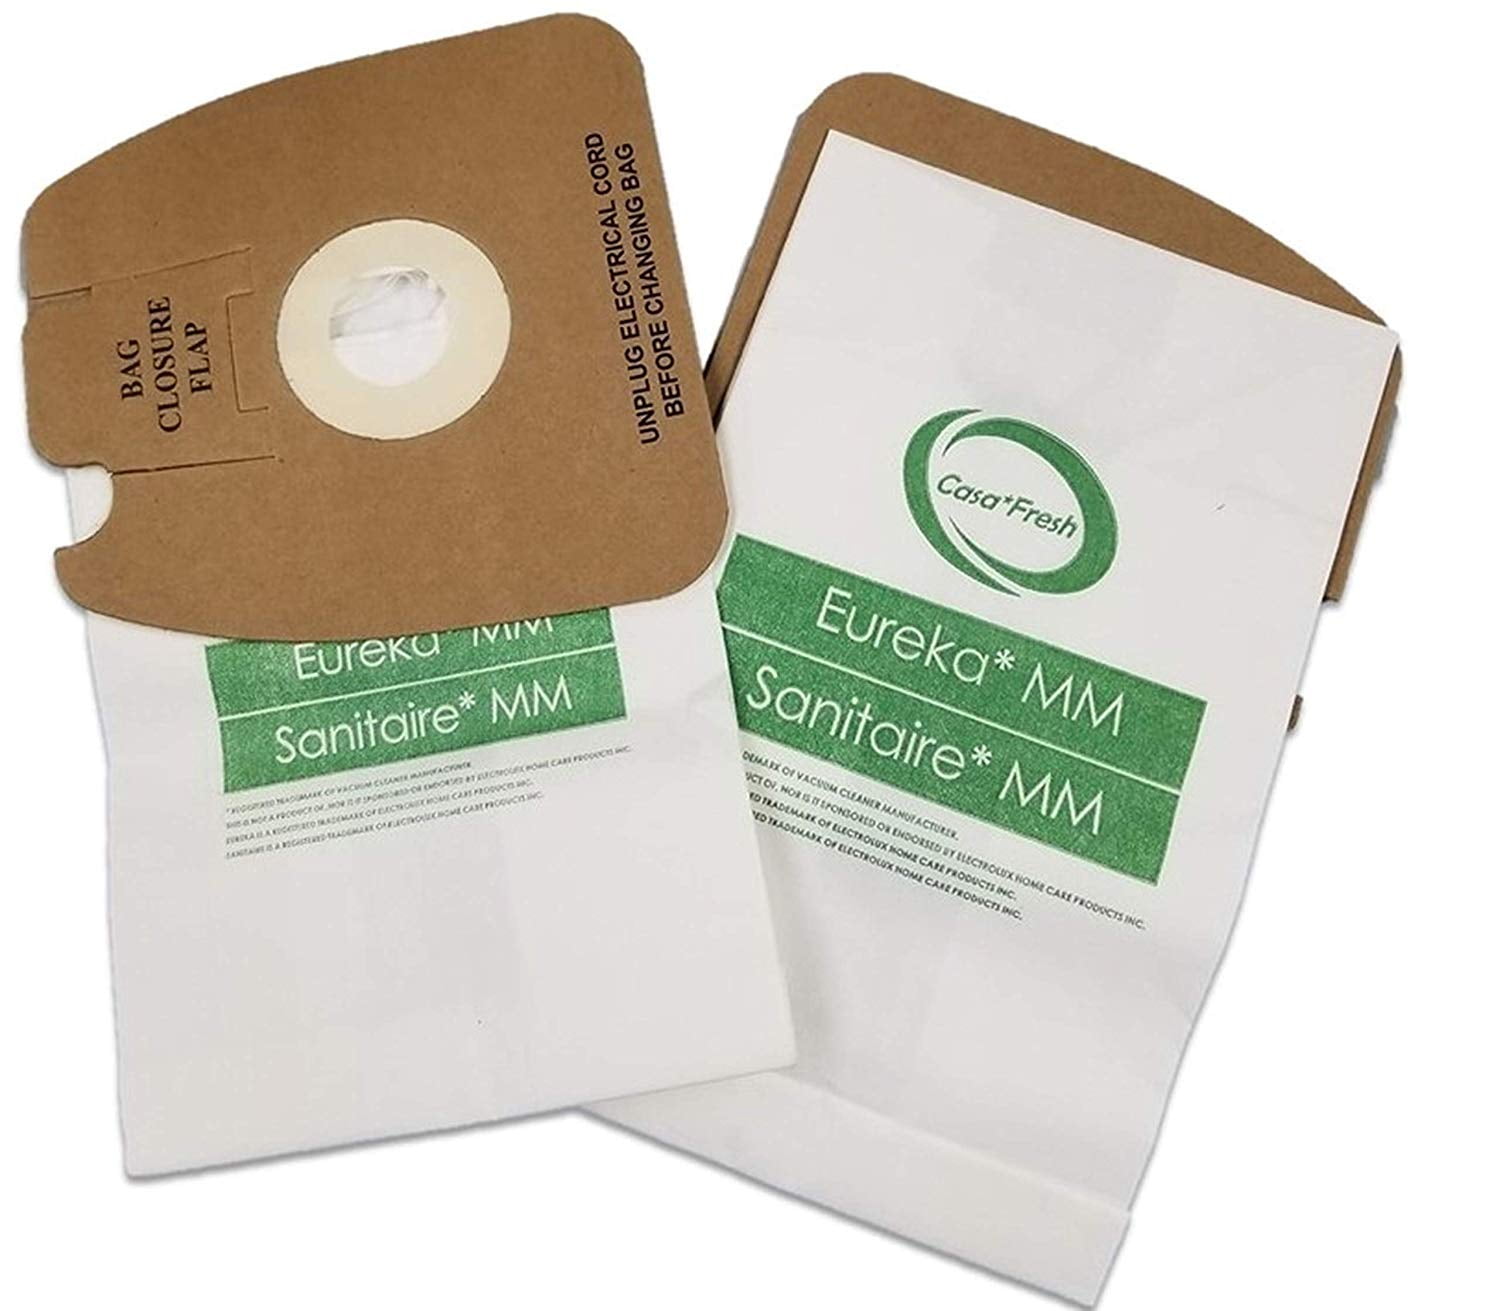 60296A w/ Micro Kit 60296C 30 Vacuum Bags for Eureka Mighty Mite 3670G 3670A 